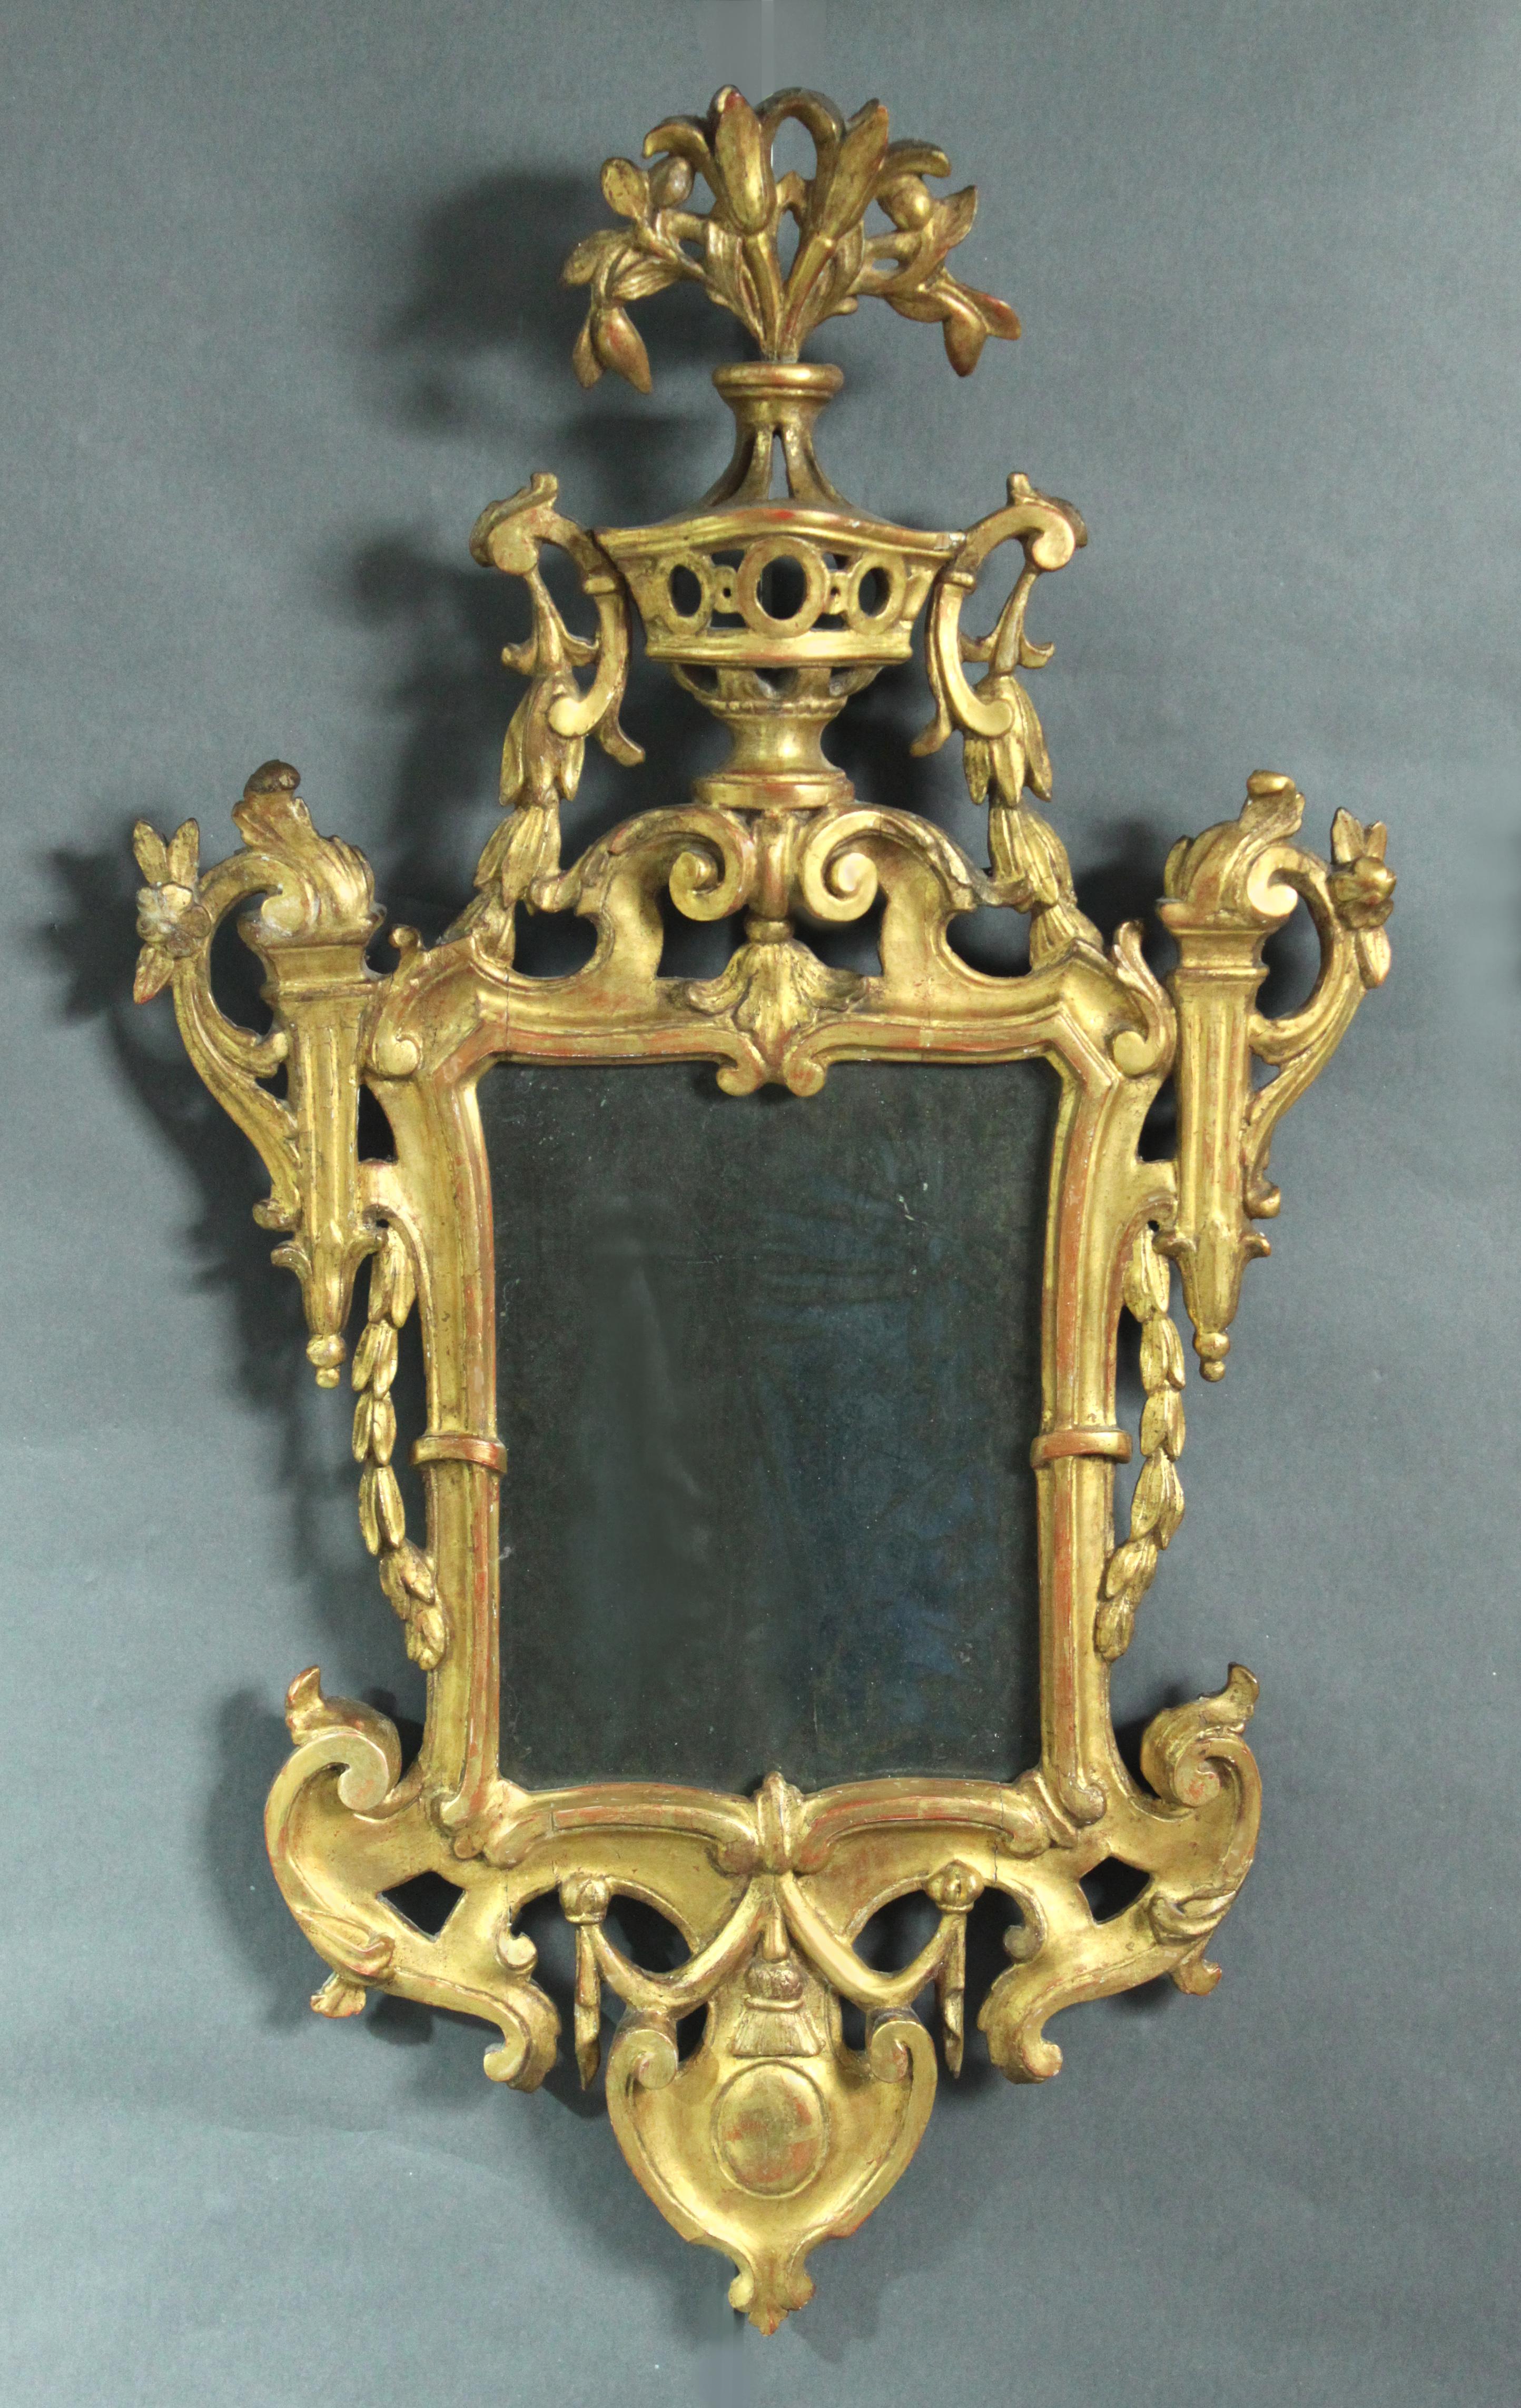 A fine pair late 18th century North Italian carved giltwood girandole mirrors in the neoclassical taste still retaining their original mercury plates.

A similar pair are illustrated in World Mirrors 1650-1900 by Graham Child image